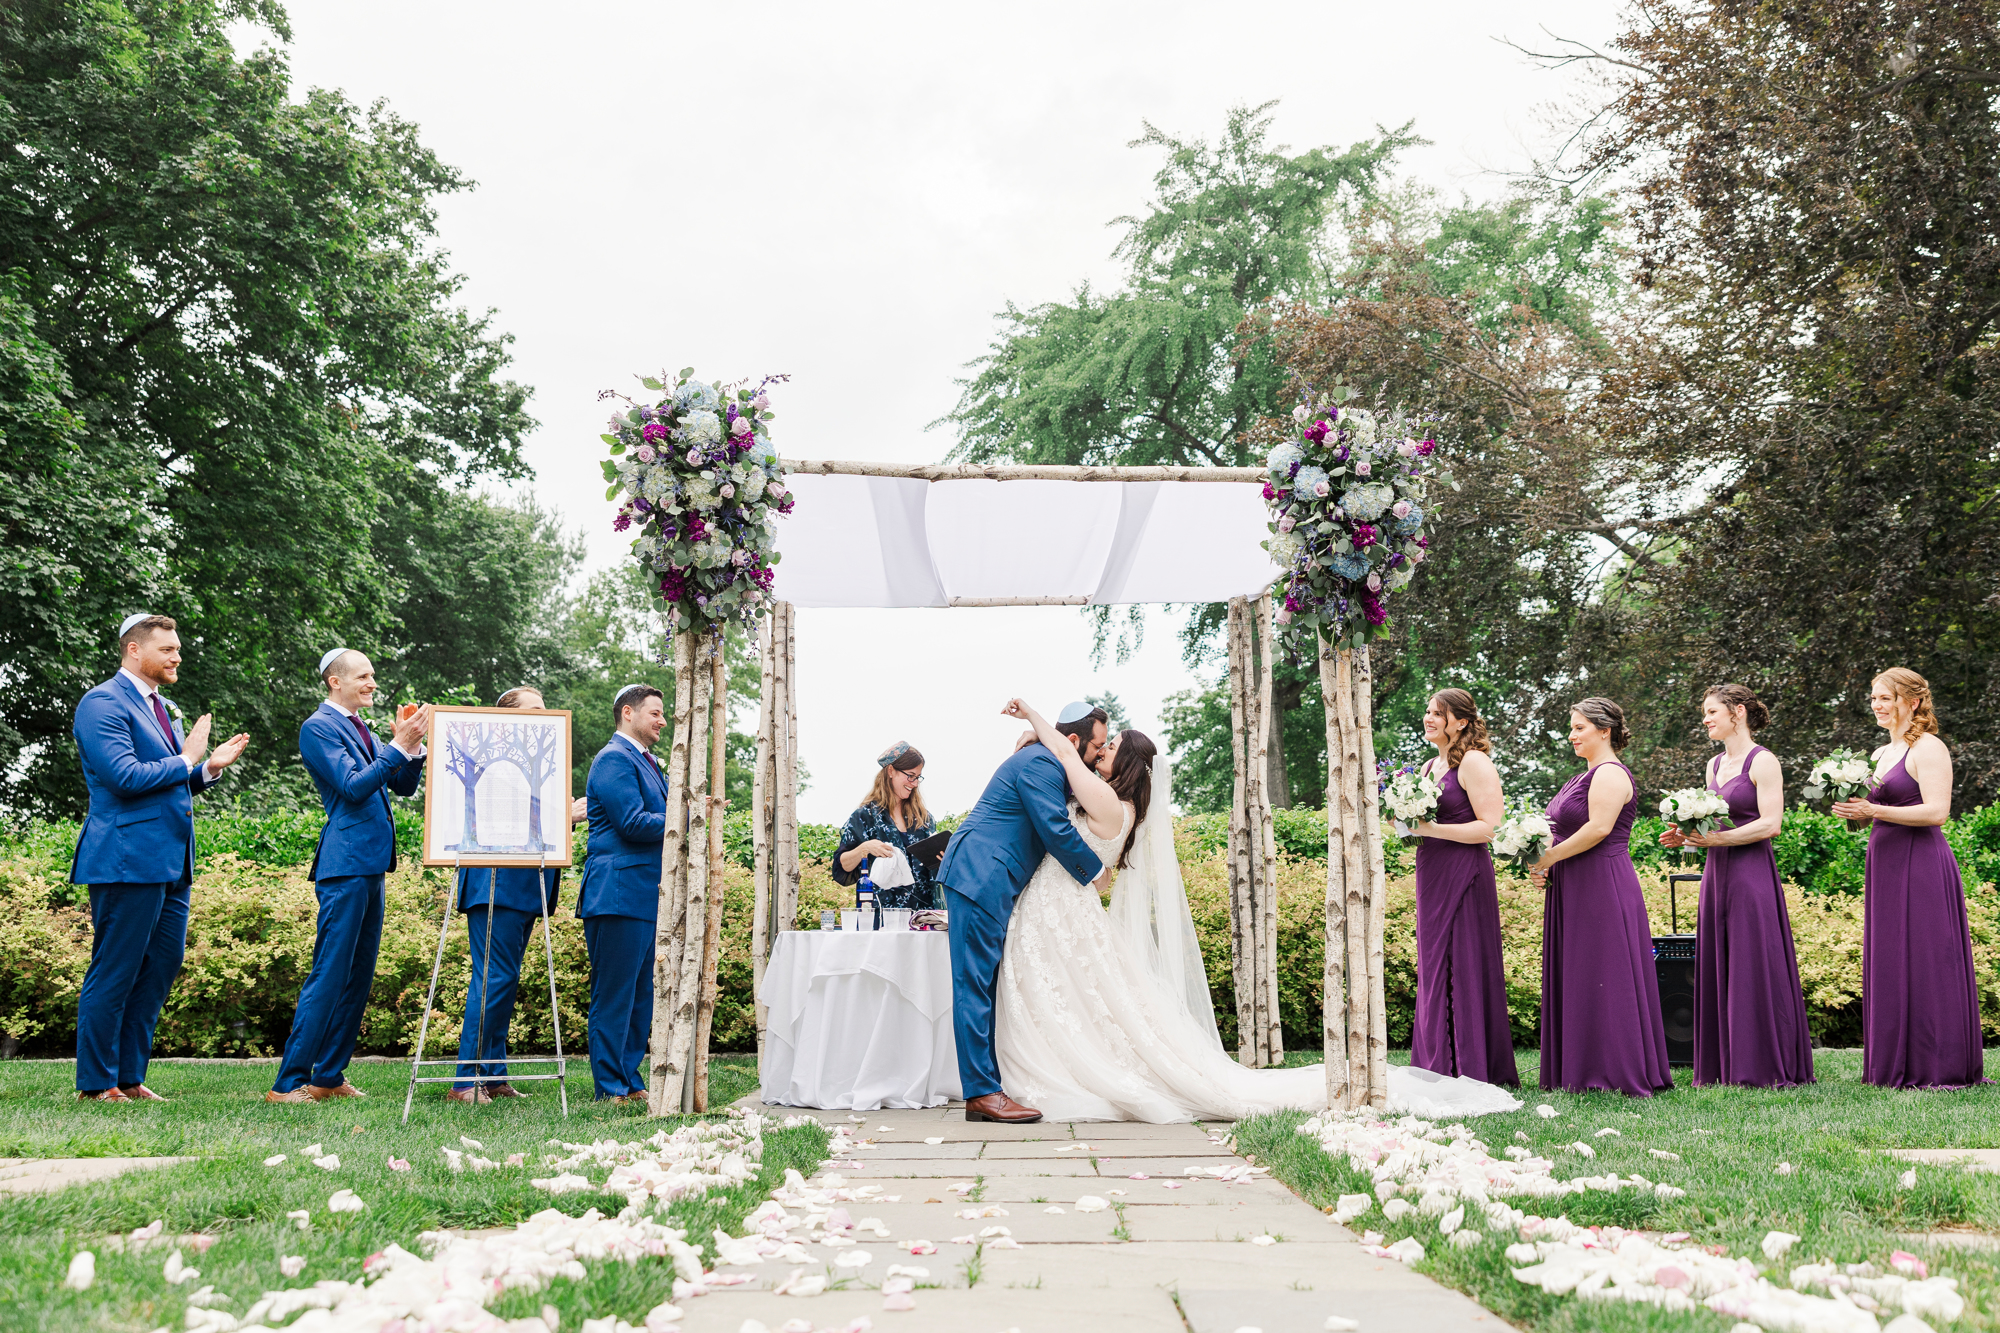 Dazzling Wedding at the Briarcliff Manor